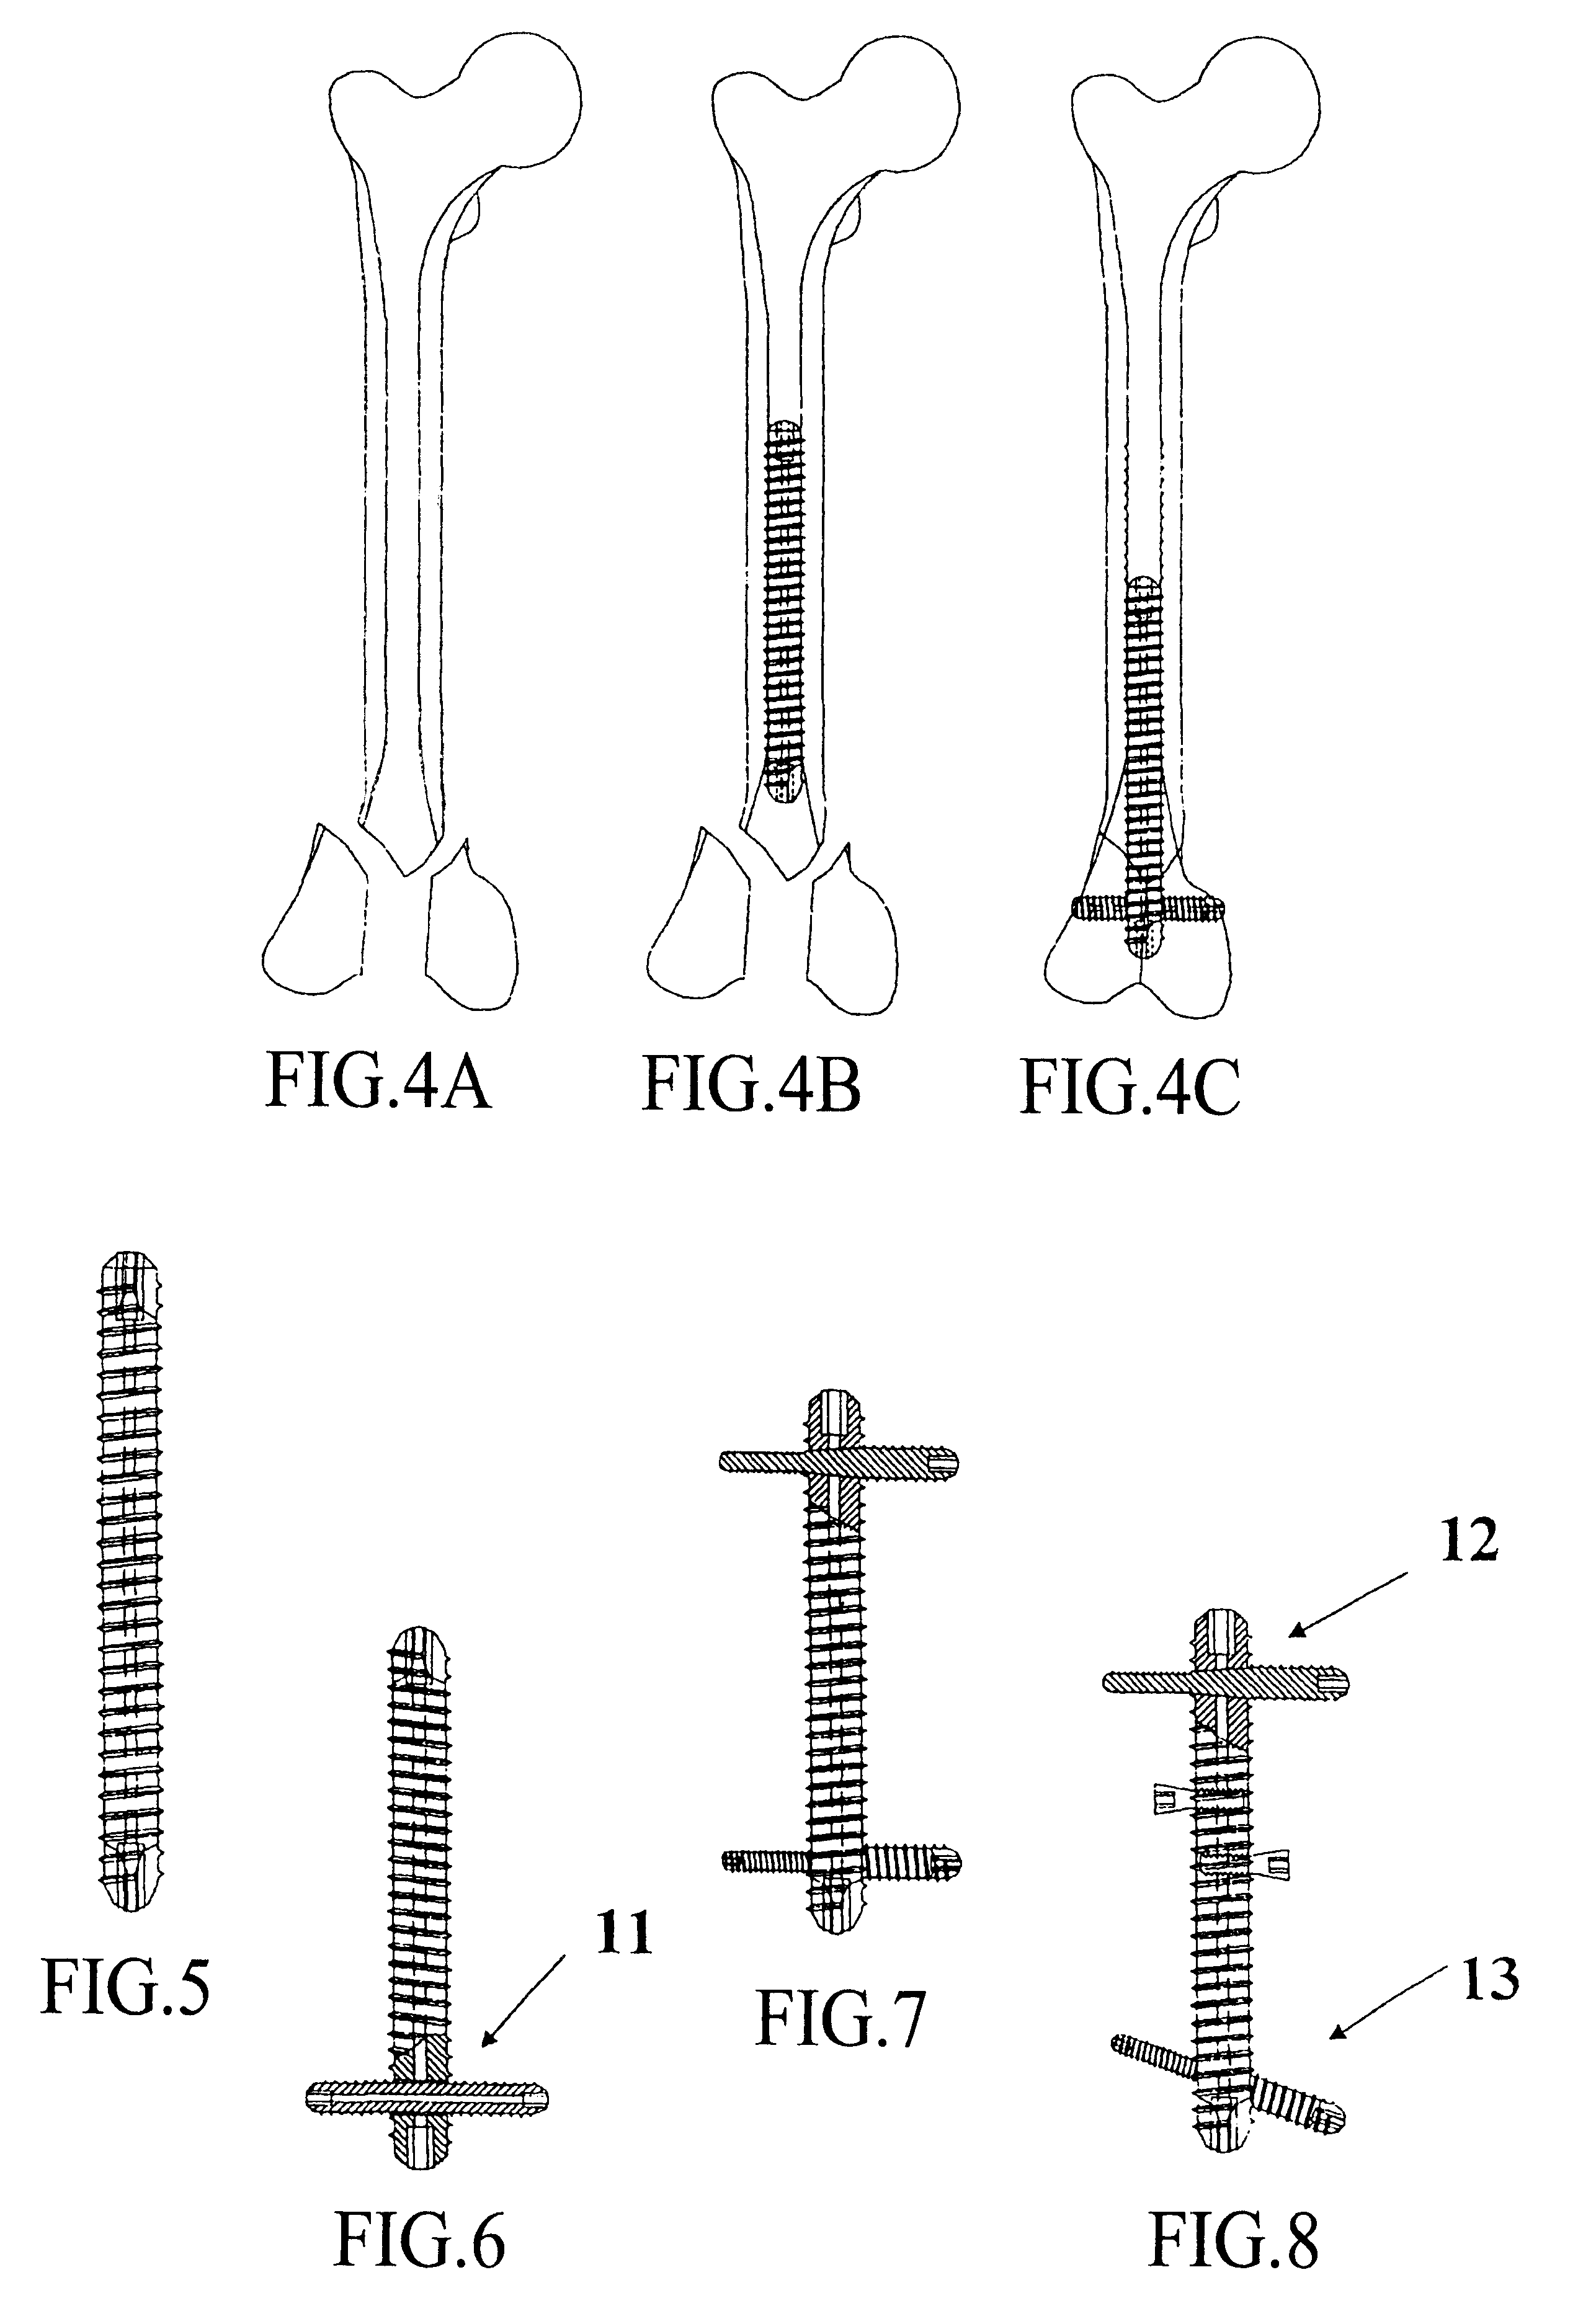 Axial intramedullary screw for the osteosynthesis of long bones